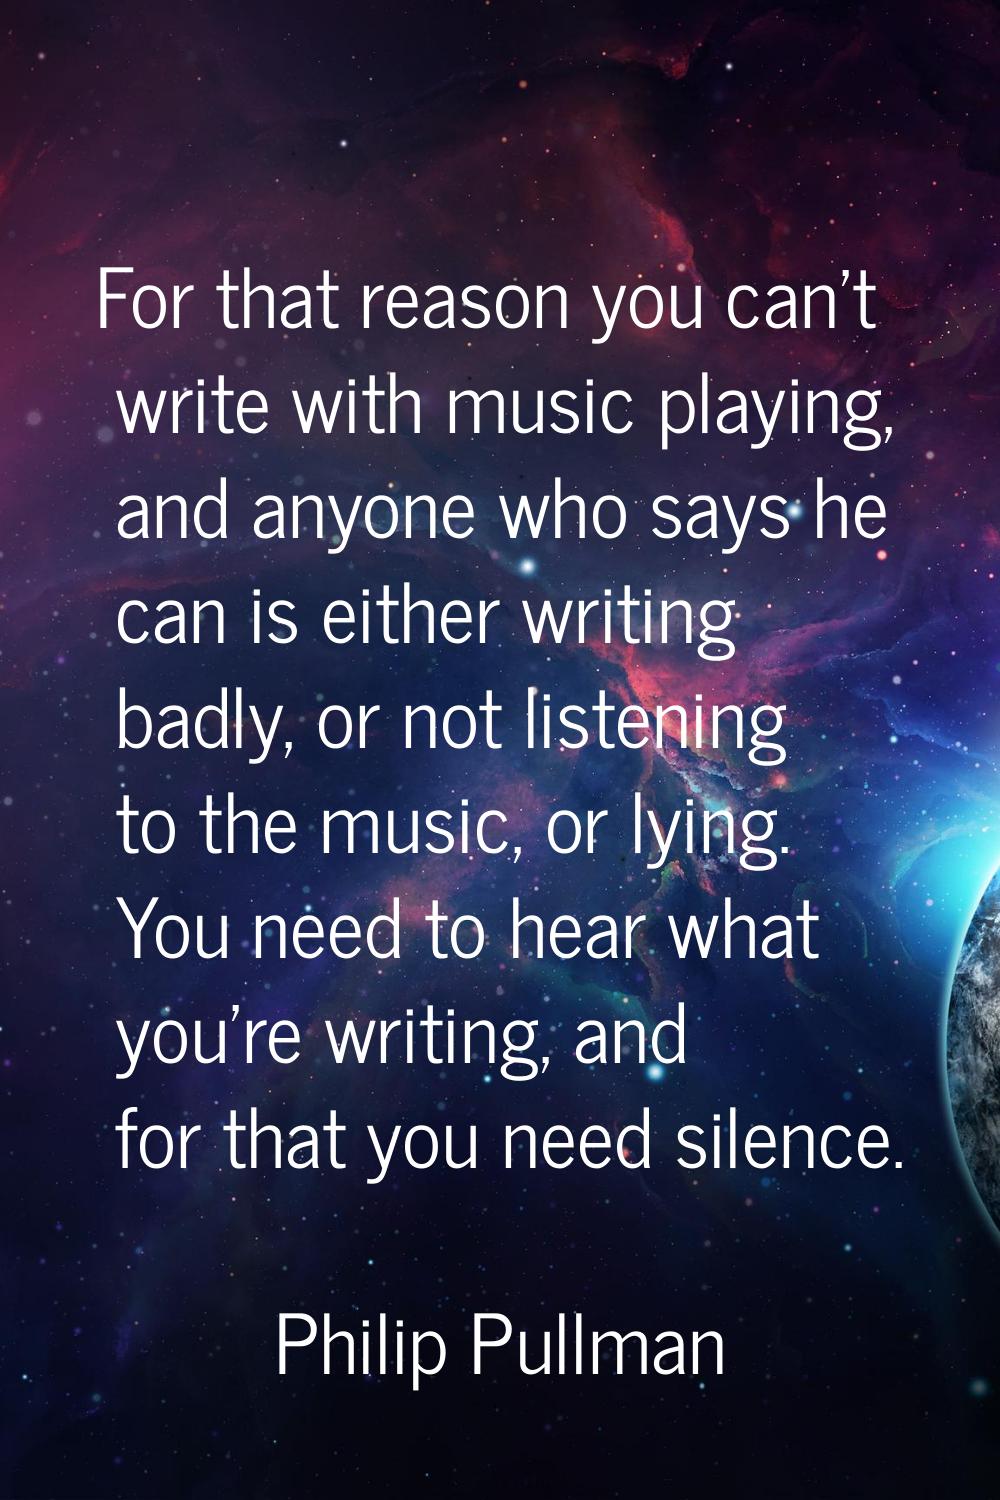 For that reason you can't write with music playing, and anyone who says he can is either writing ba